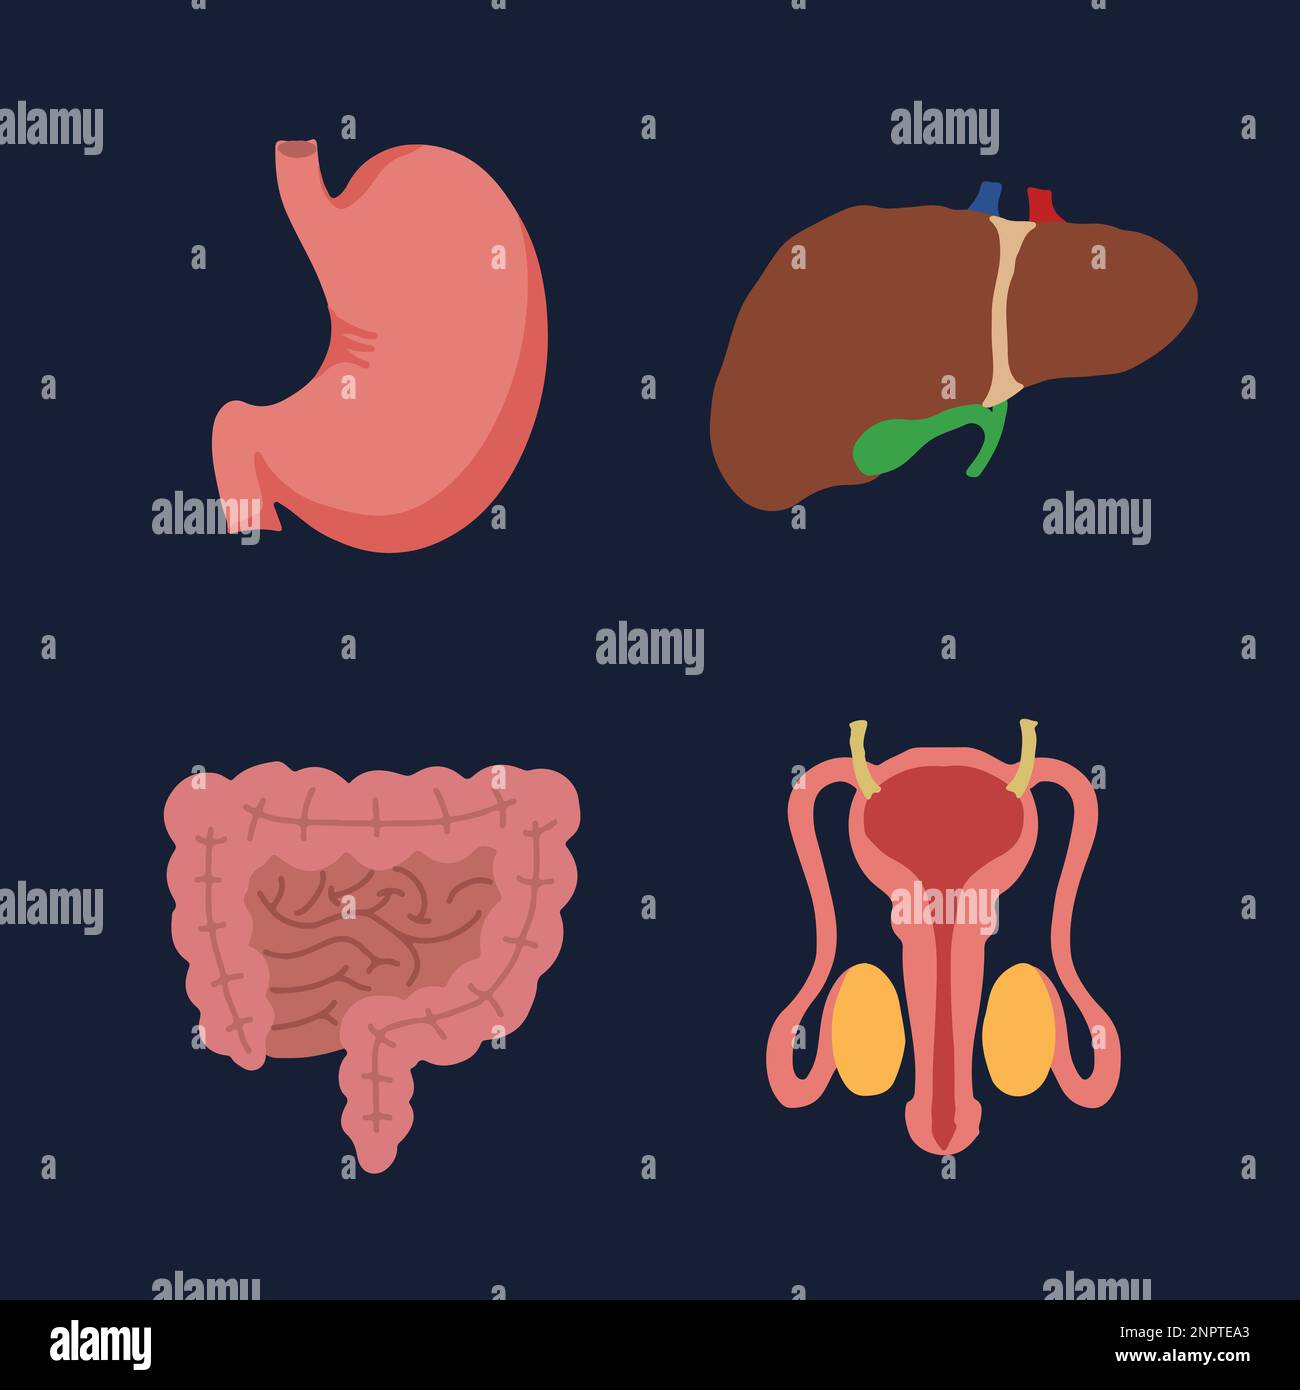 Human Internal organs, cartoon anatomy body parts, stomach with intestinal system, liver with gall bladder and male reproductive system, vector illust Stock Vector